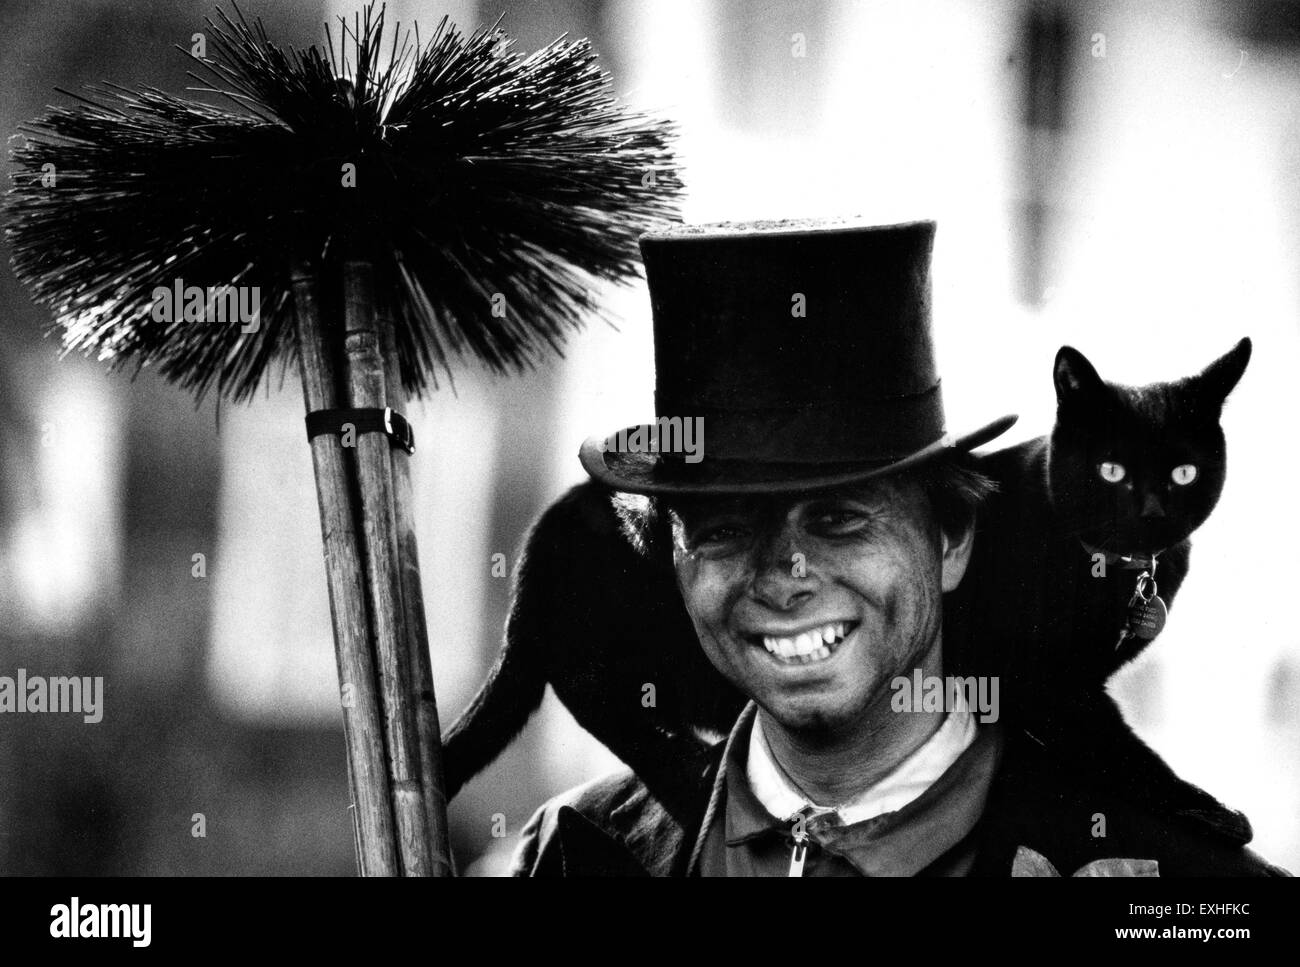 Chimney sweep with brush and black cat on his shoulder 1980s Stock Photo